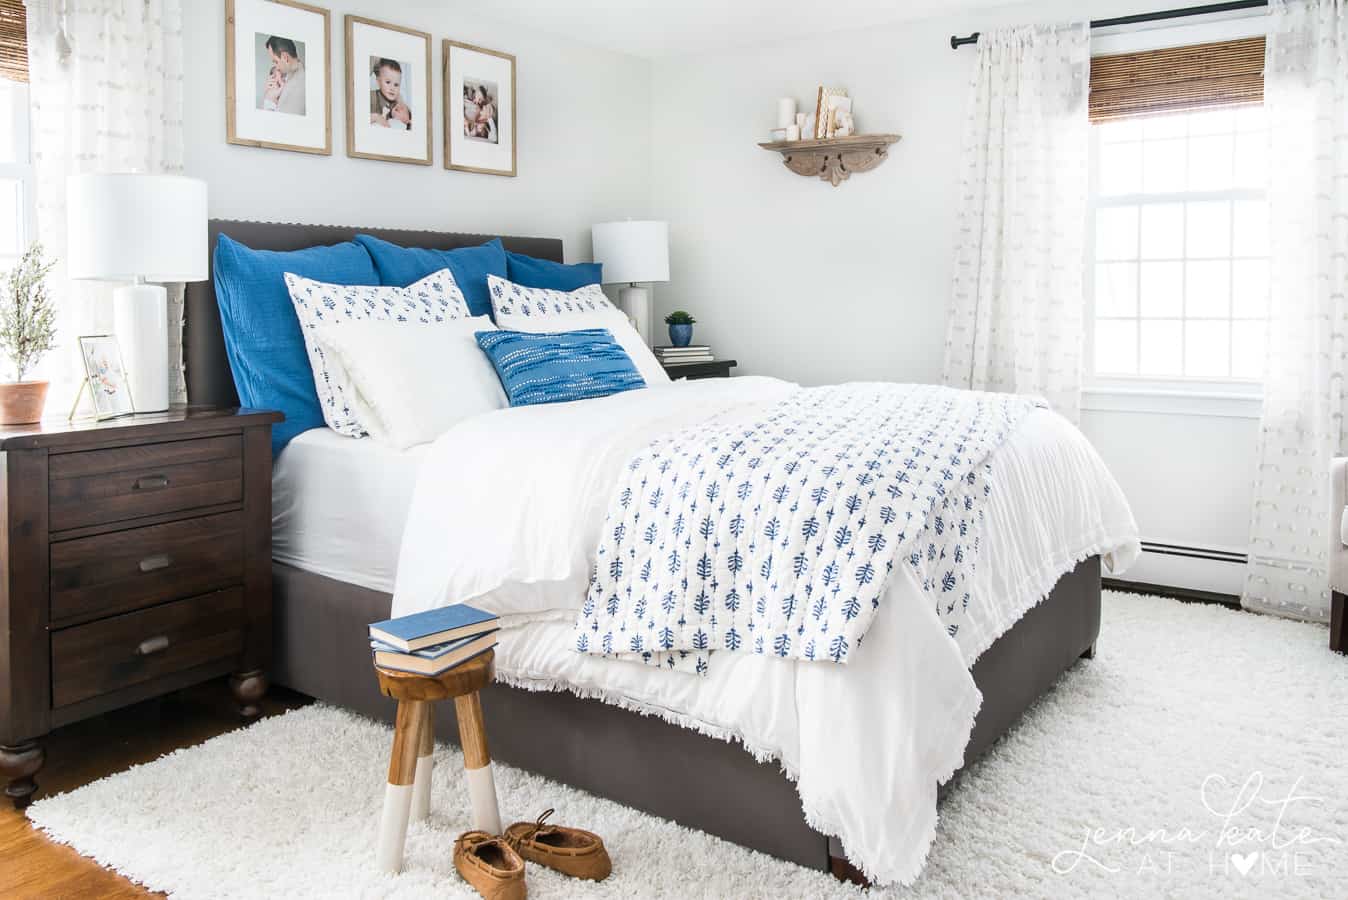 Make over your bedroom without paint or new furniture - just switch out the bedding for a fresh new look!